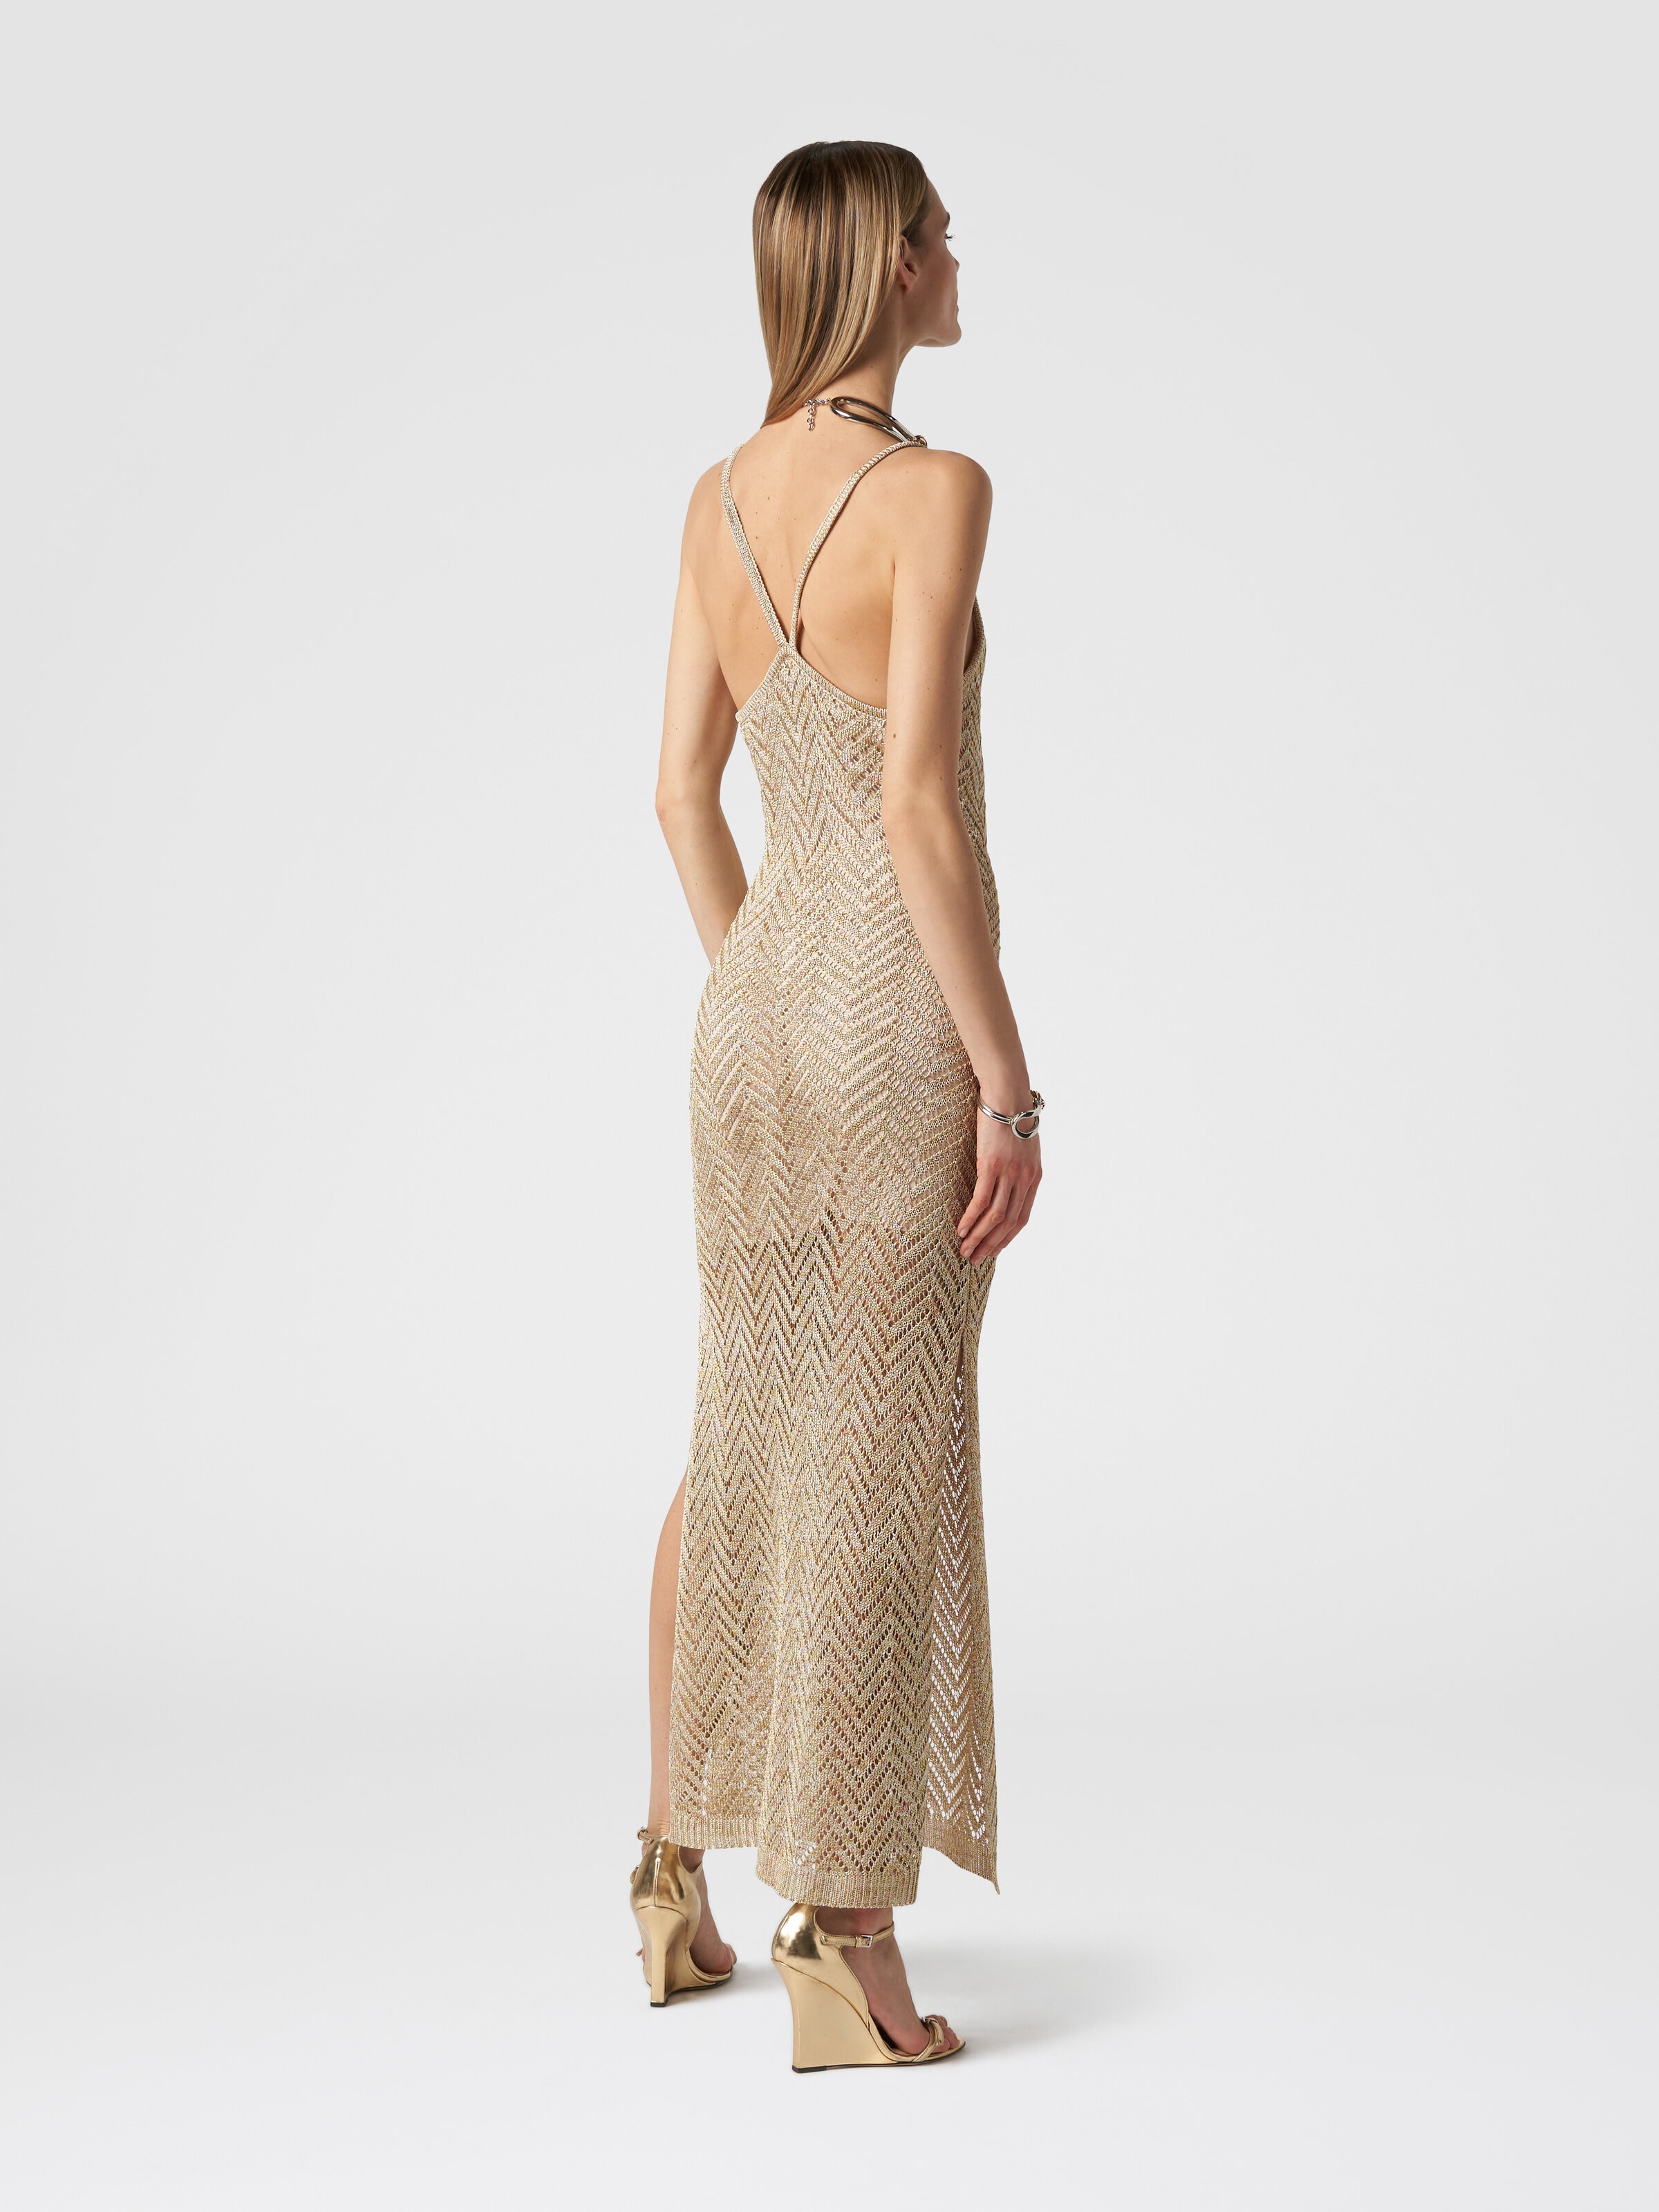 Dress in zigzag knit with crochet-effect weave, Gold - 2